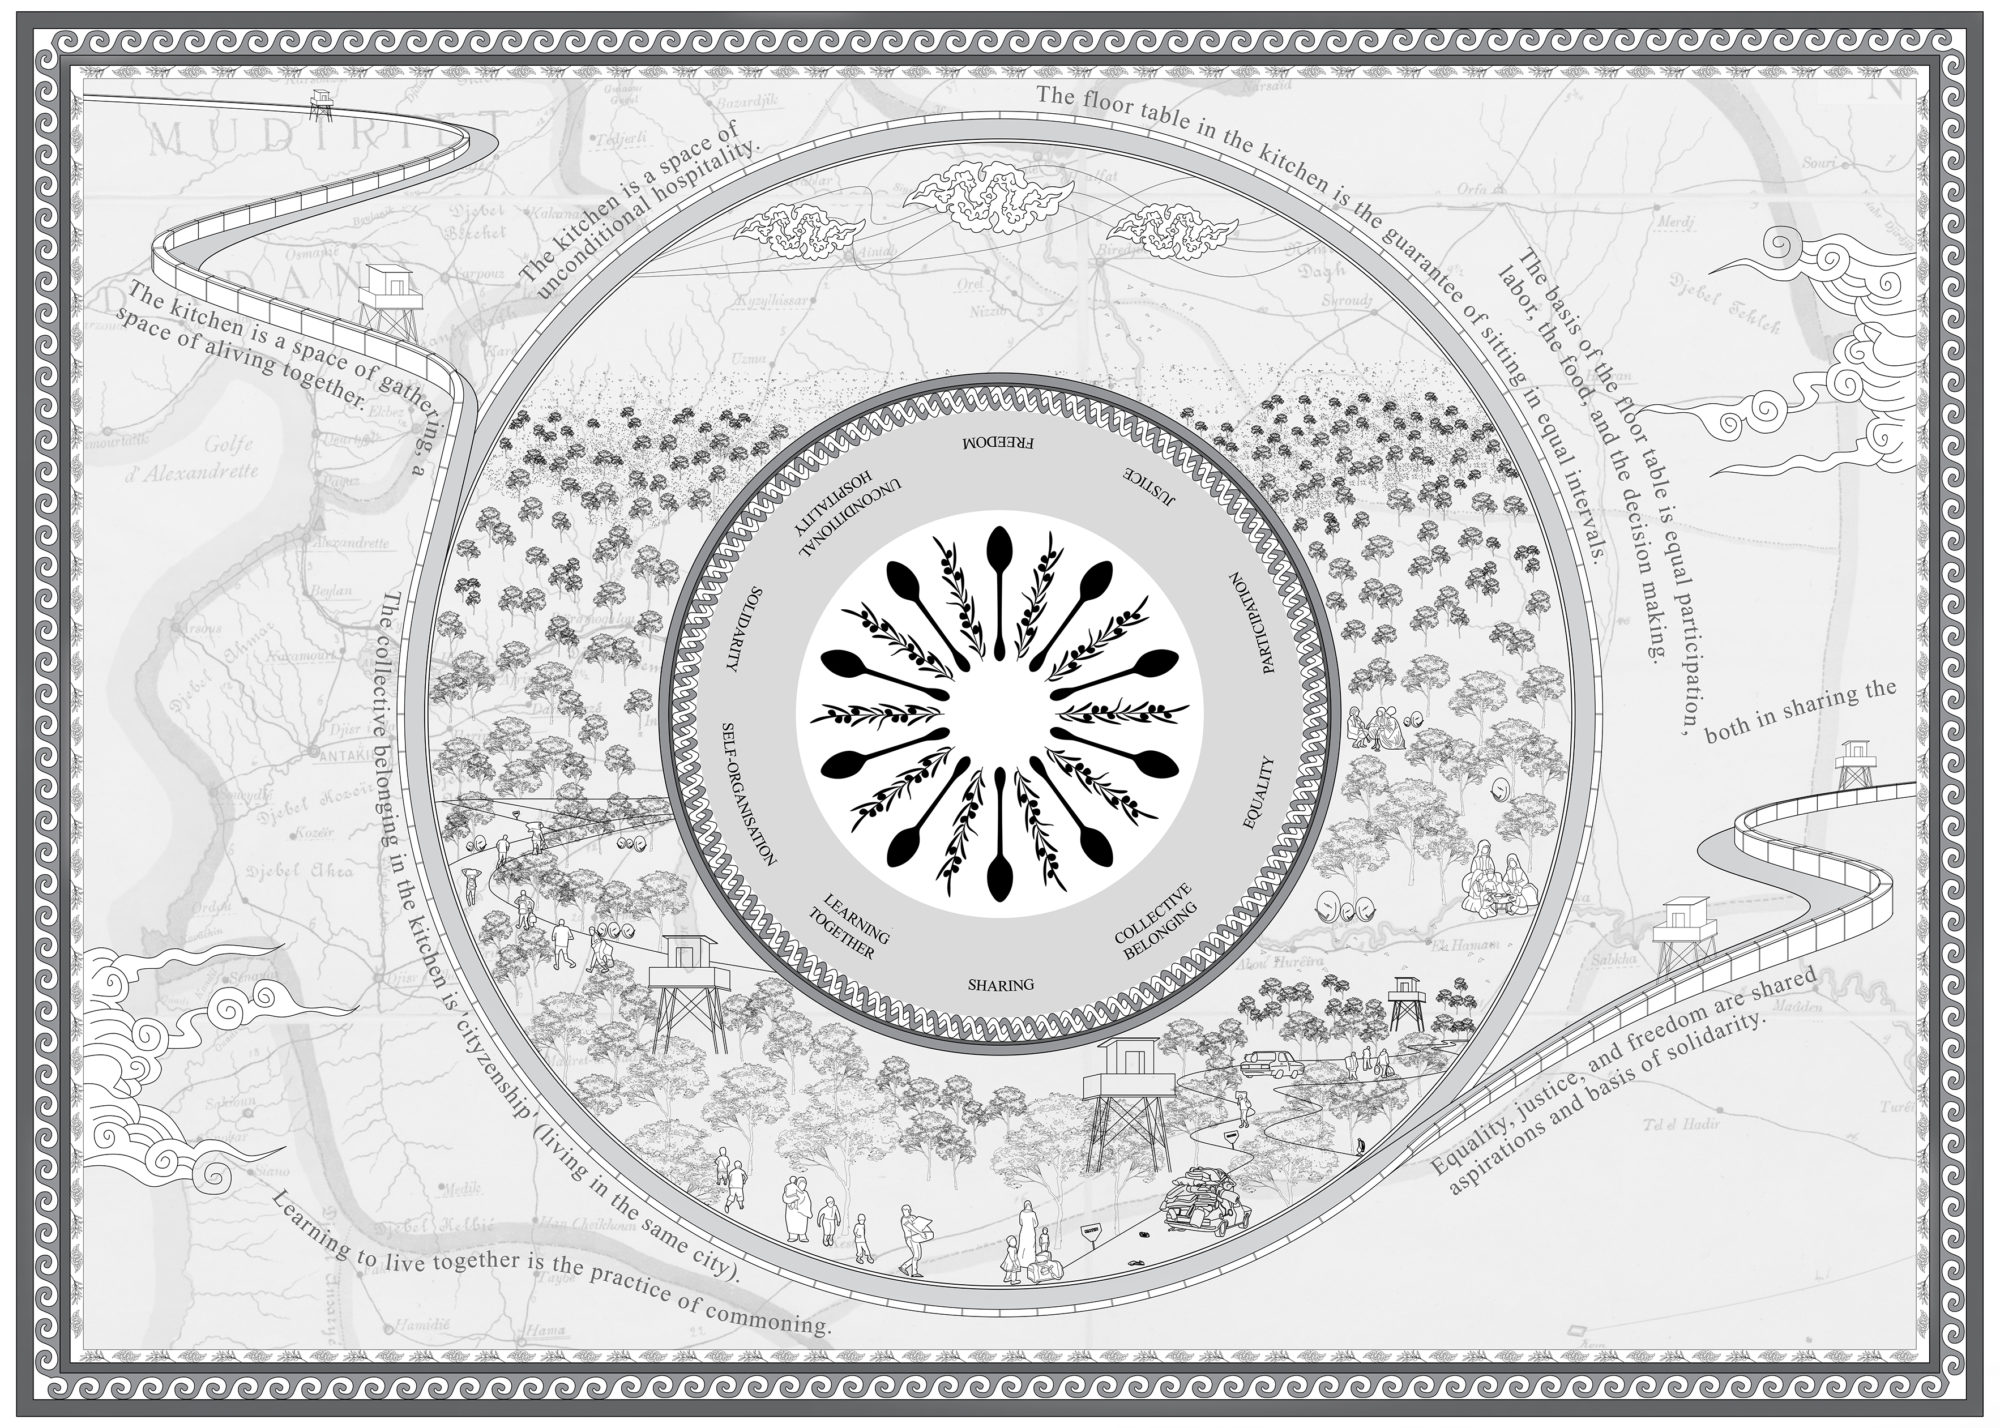 A map composed of mostly light gray lines and shades. The center is a series of three concentric circles, the first containing radiating spoons and foliage; the second containing words relating to peace, justice, and solidarity; and the third picturing fields of trees with some lookout posts and human figures. The area surrounding the central circles contains cartographic lines of a map with illustrations of walls and stylized clouds.